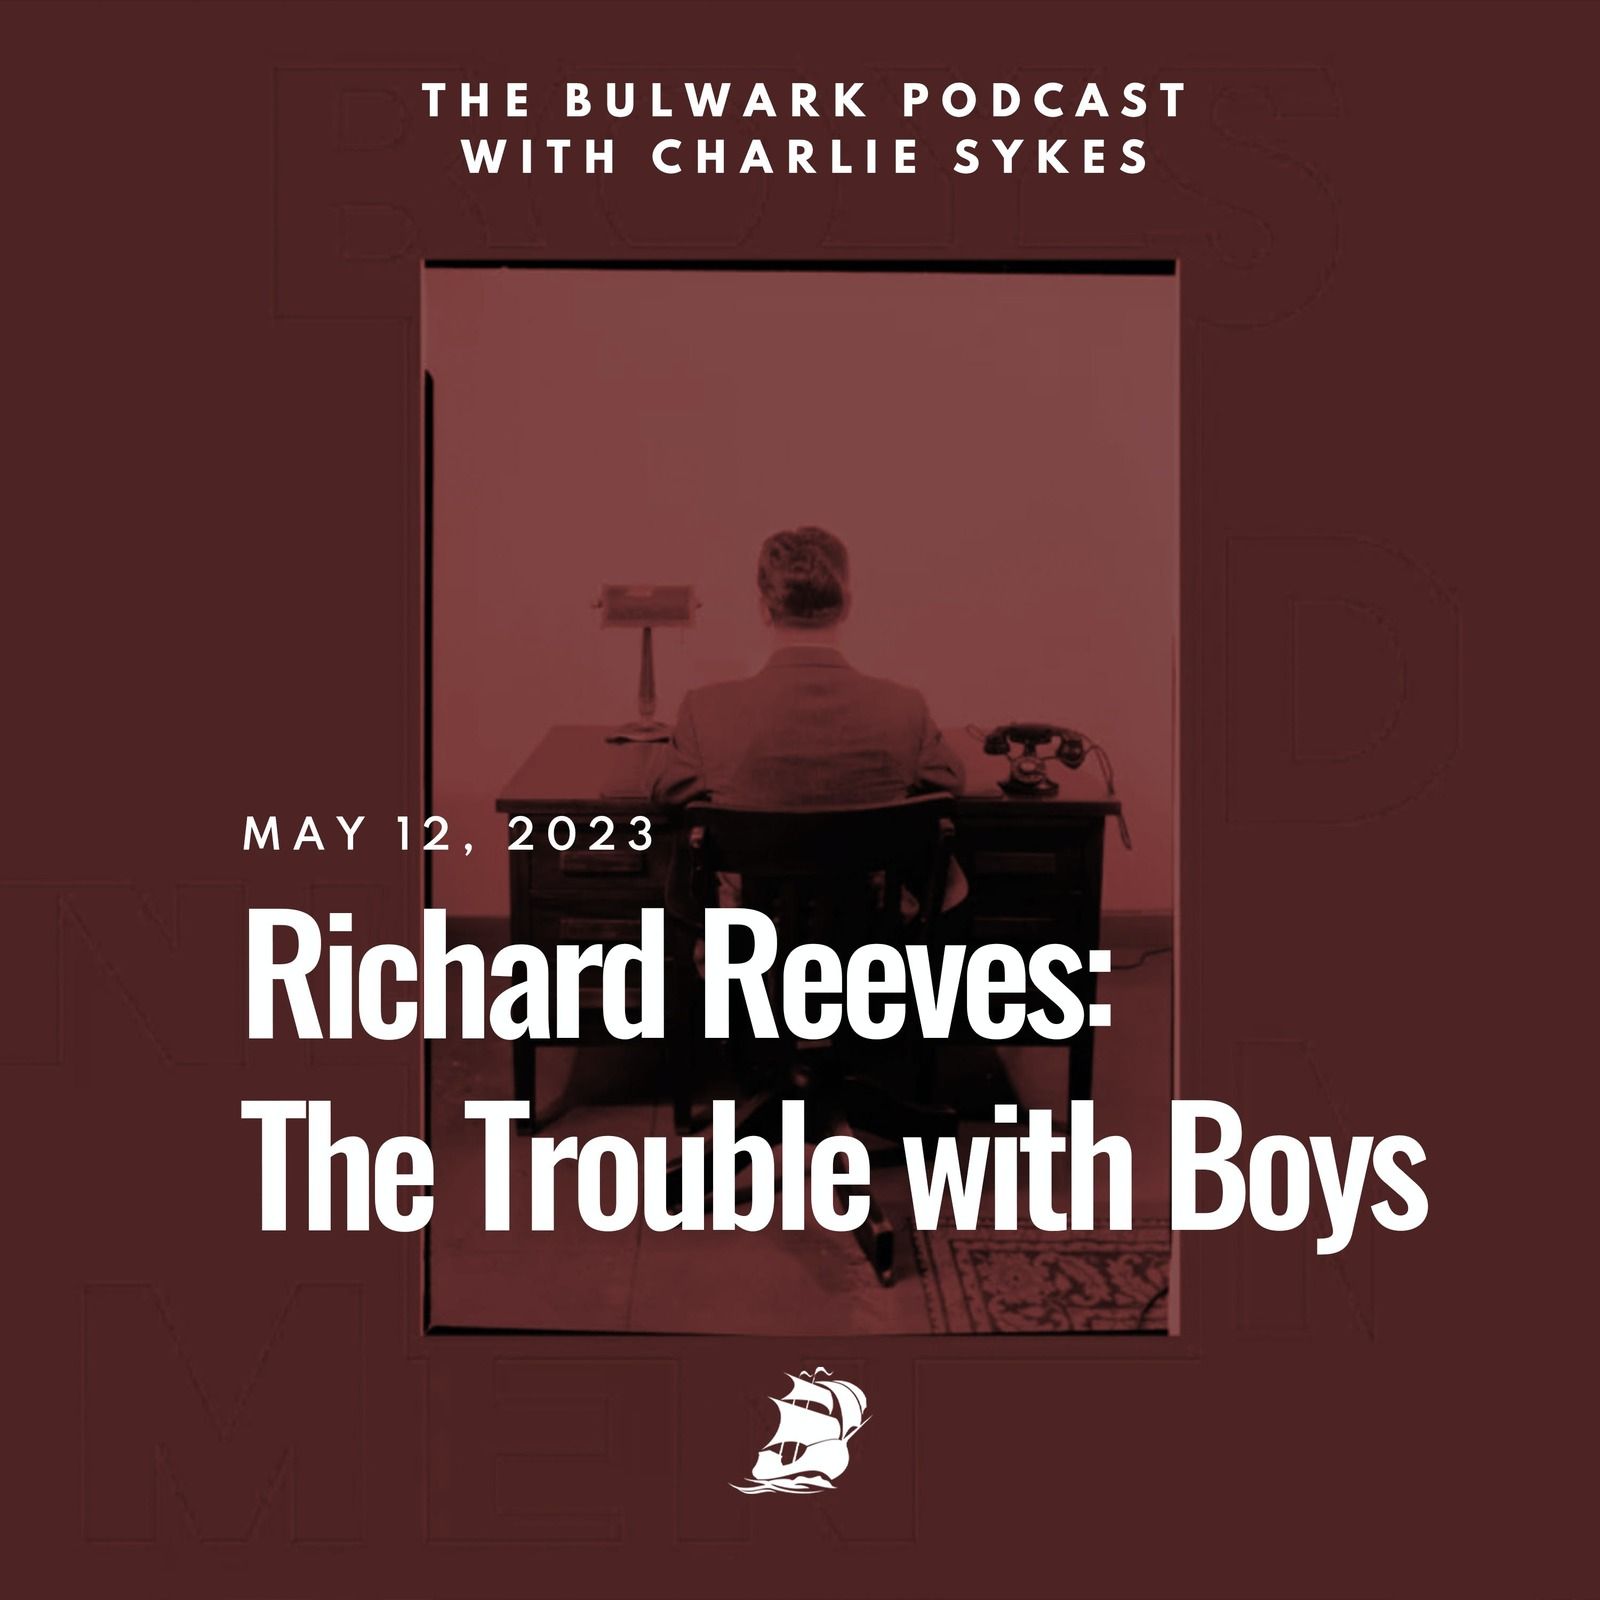 Richard Reeves: The Trouble with Boys by The Bulwark Podcast